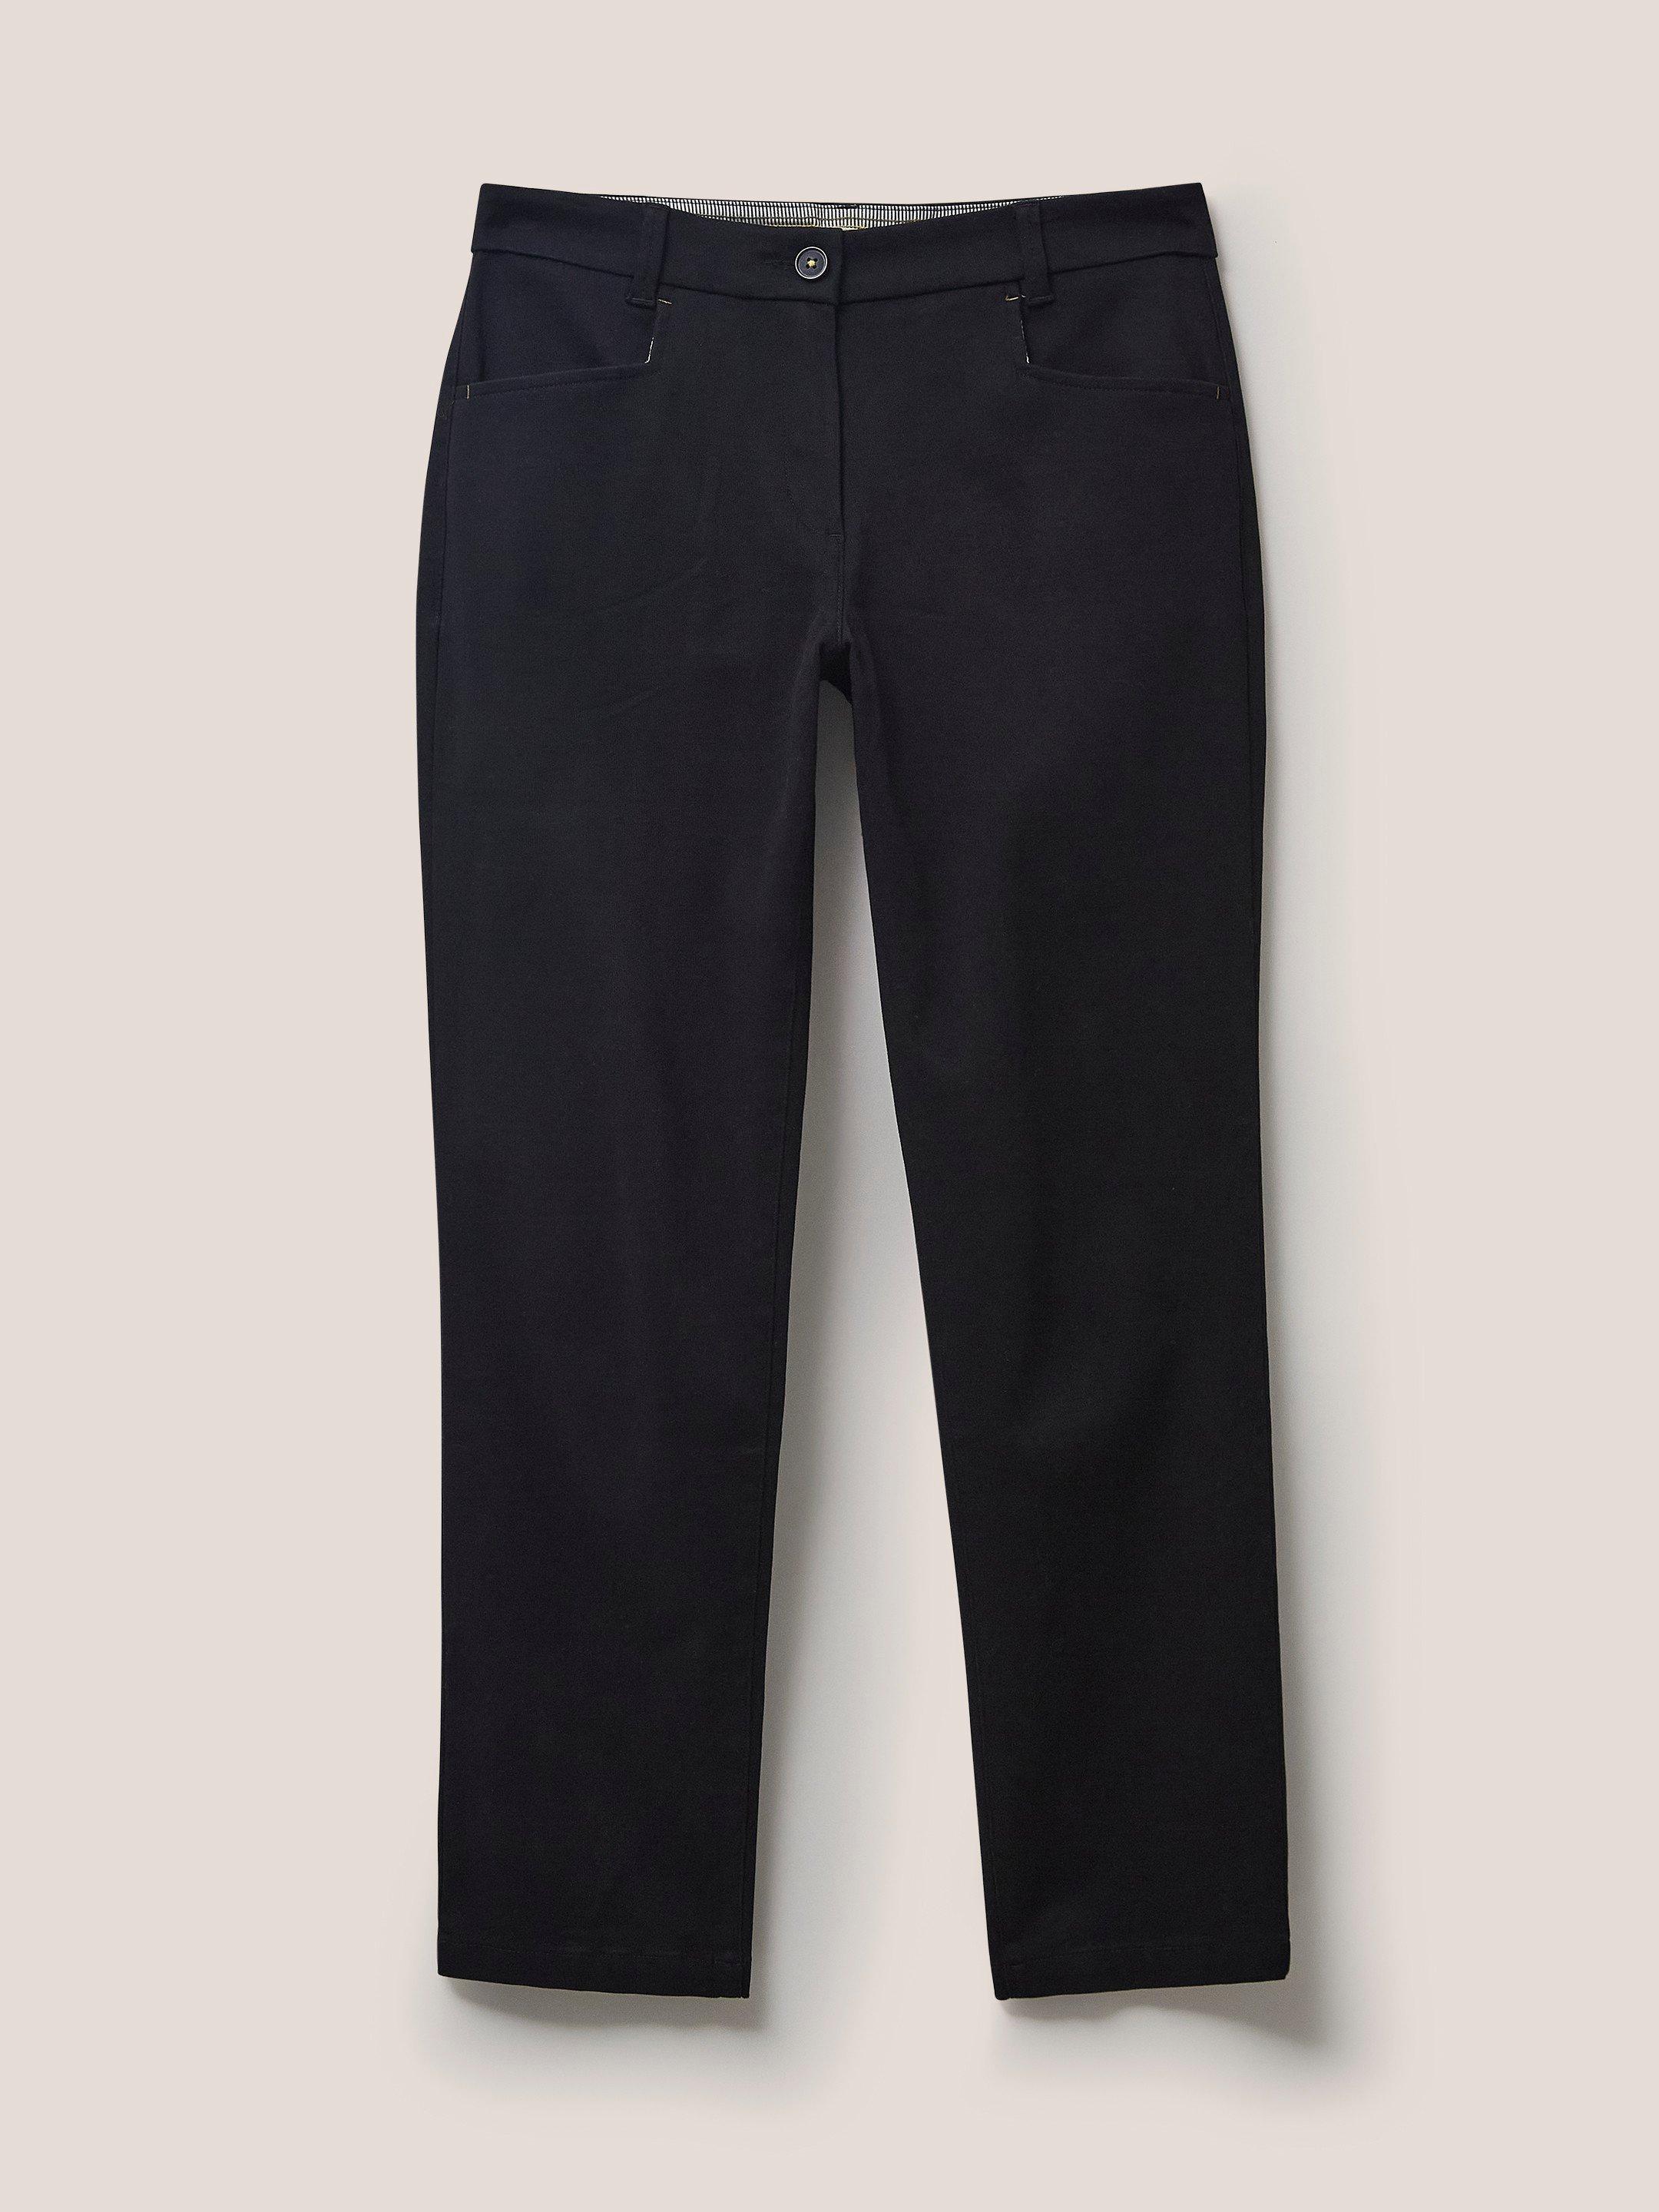 Sienna Stretch Trousers in PURE BLK - FLAT FRONT